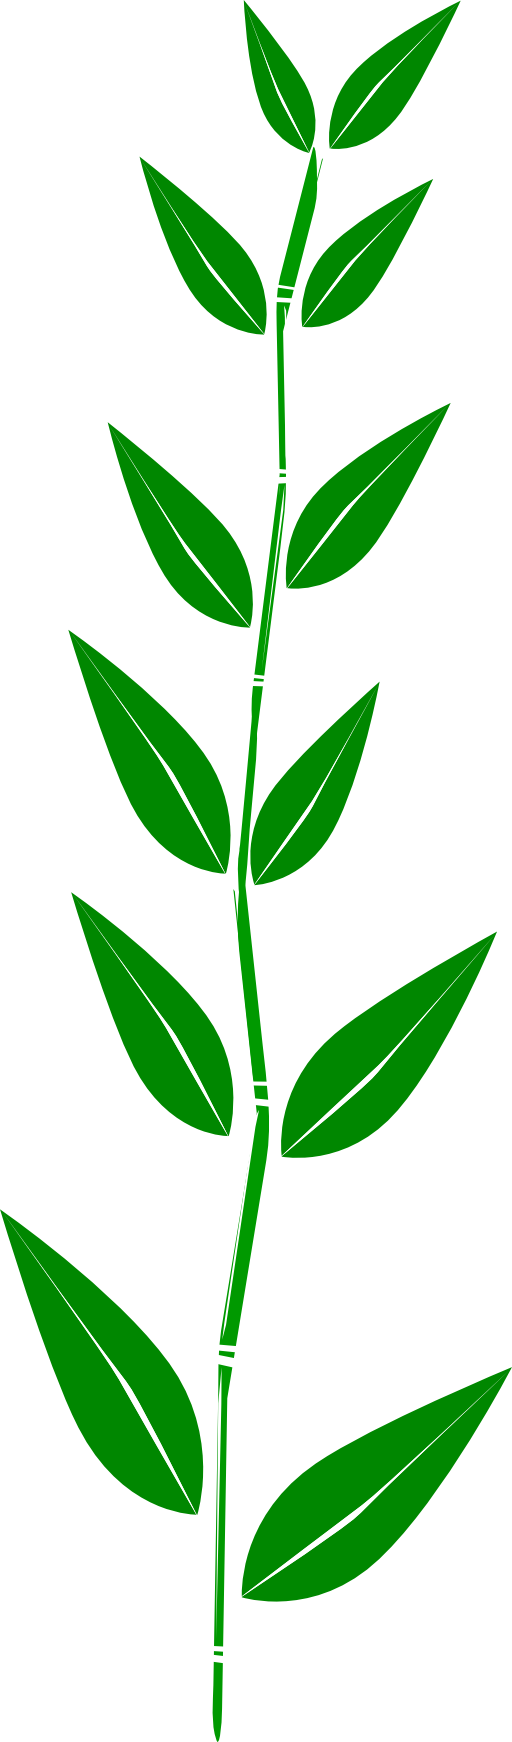 clipart of green leaves - photo #23